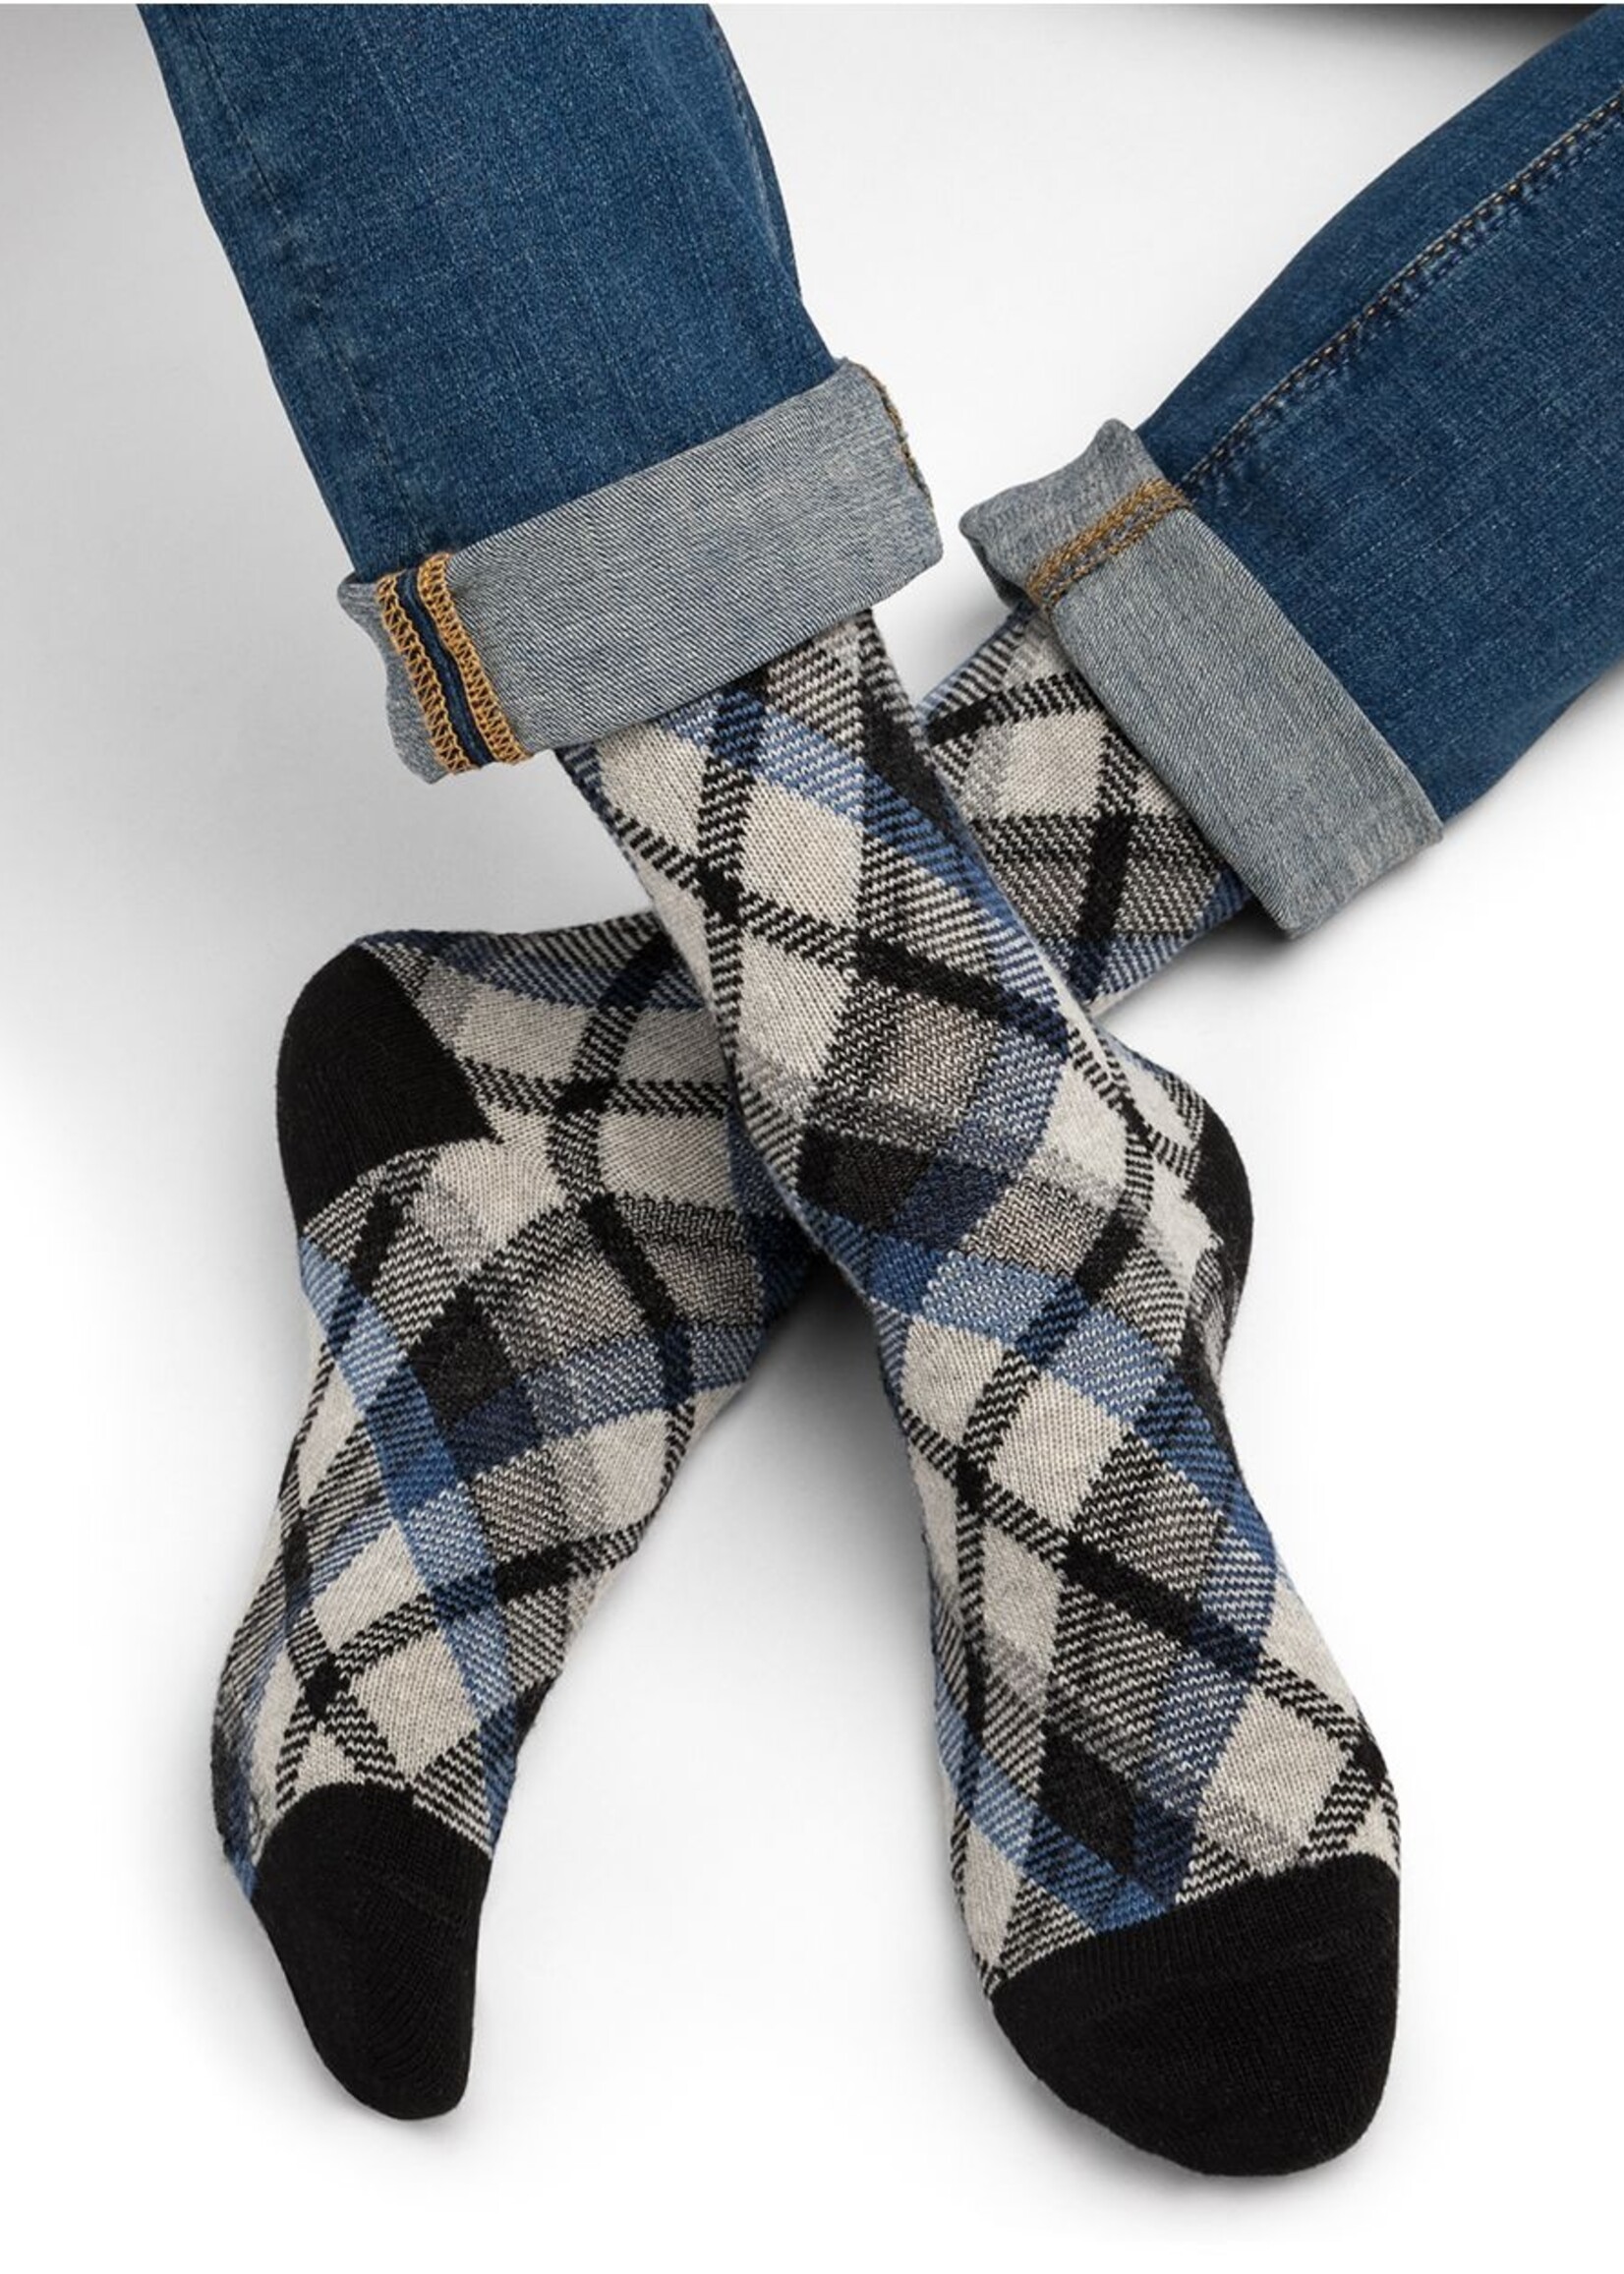 Bleuforet Men's Wool and Cashmere Socks with Tartan Pattern 7005